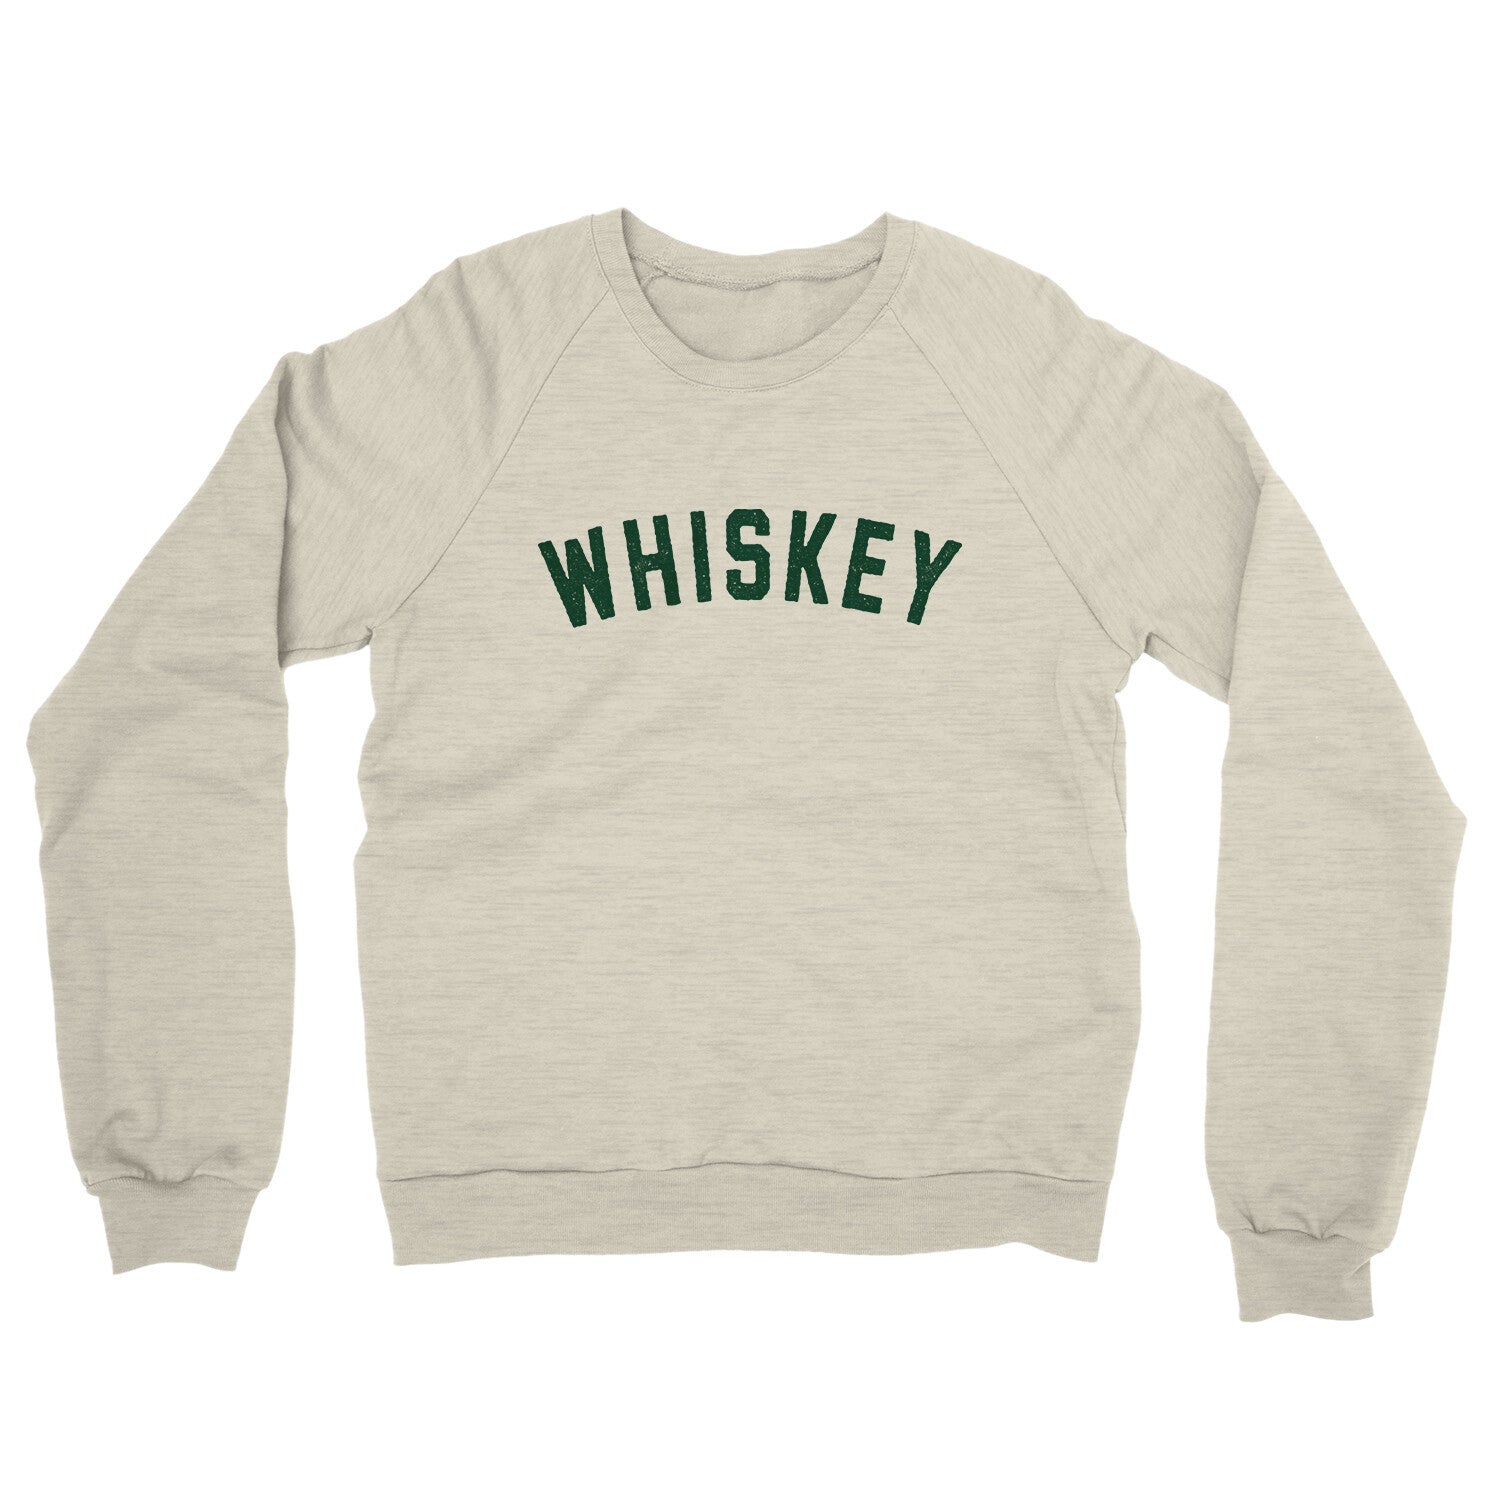 Whiskey in Heather Oatmeal Color